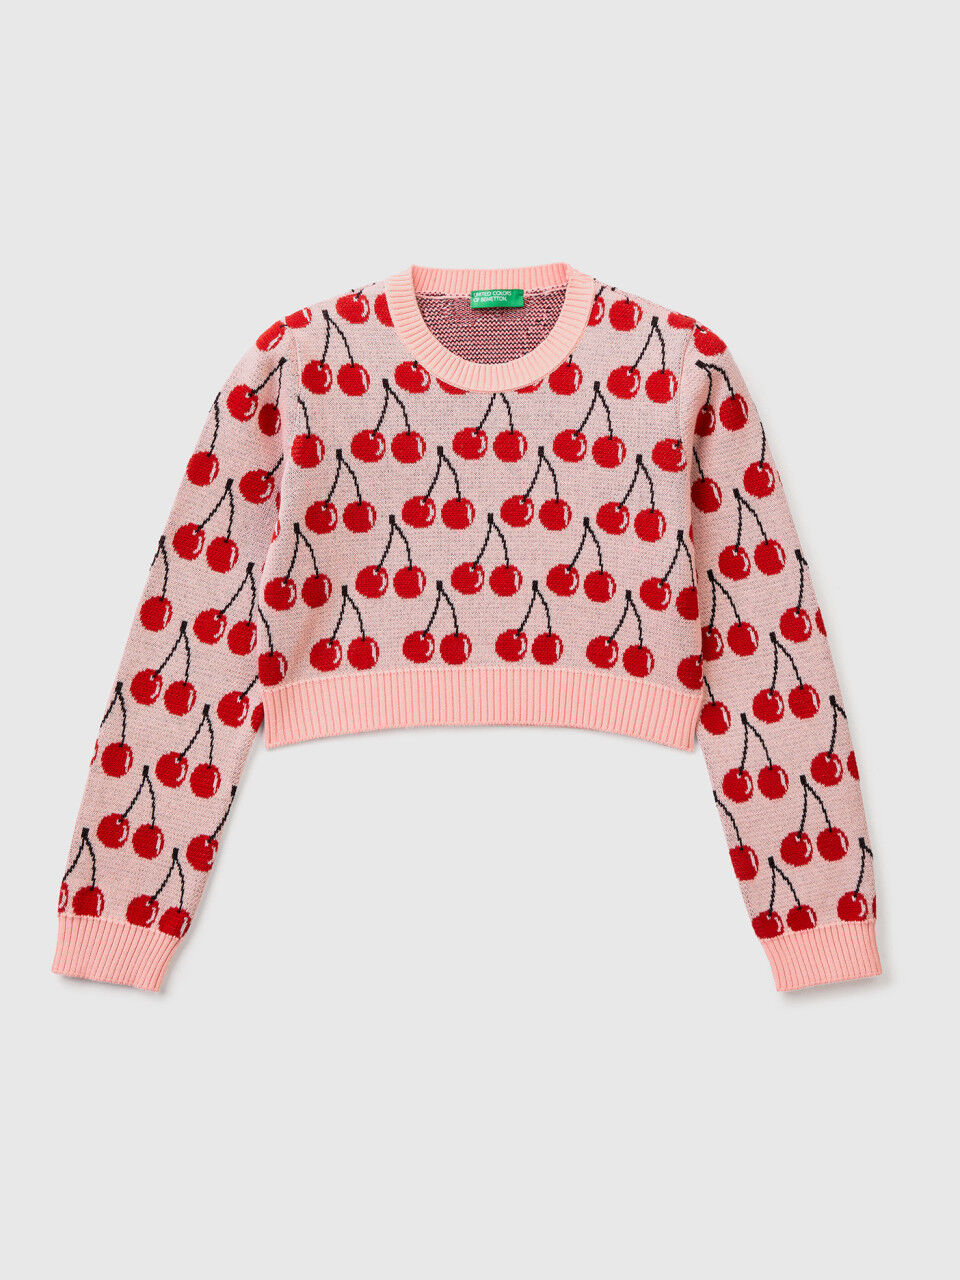 Pink cropped sweater with cherry pattern